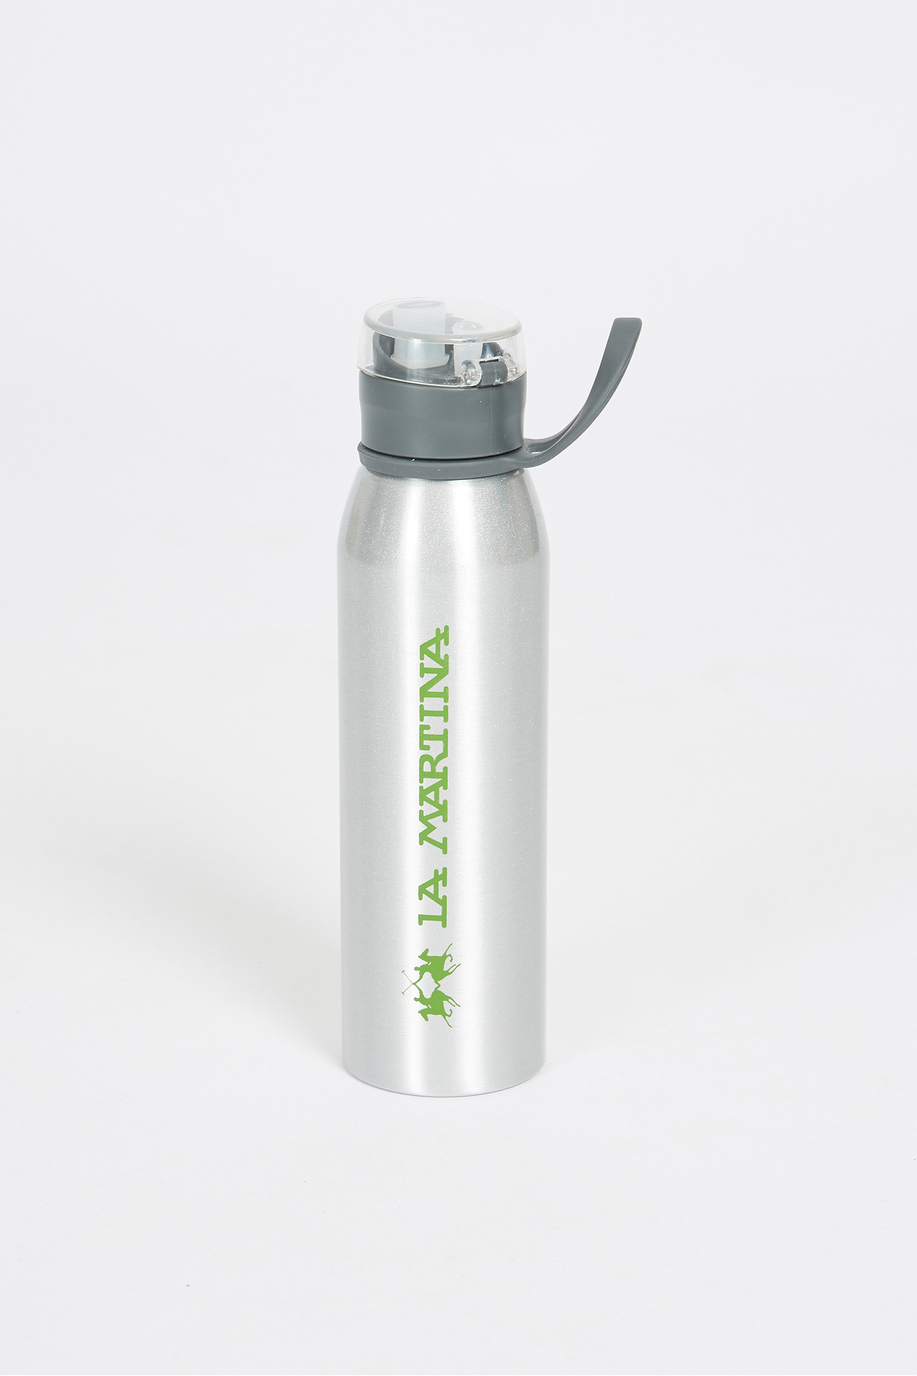 Unisex aluminium bottle with a watertight lid and logo - Gifts under €75 for her | La Martina - Official Online Shop